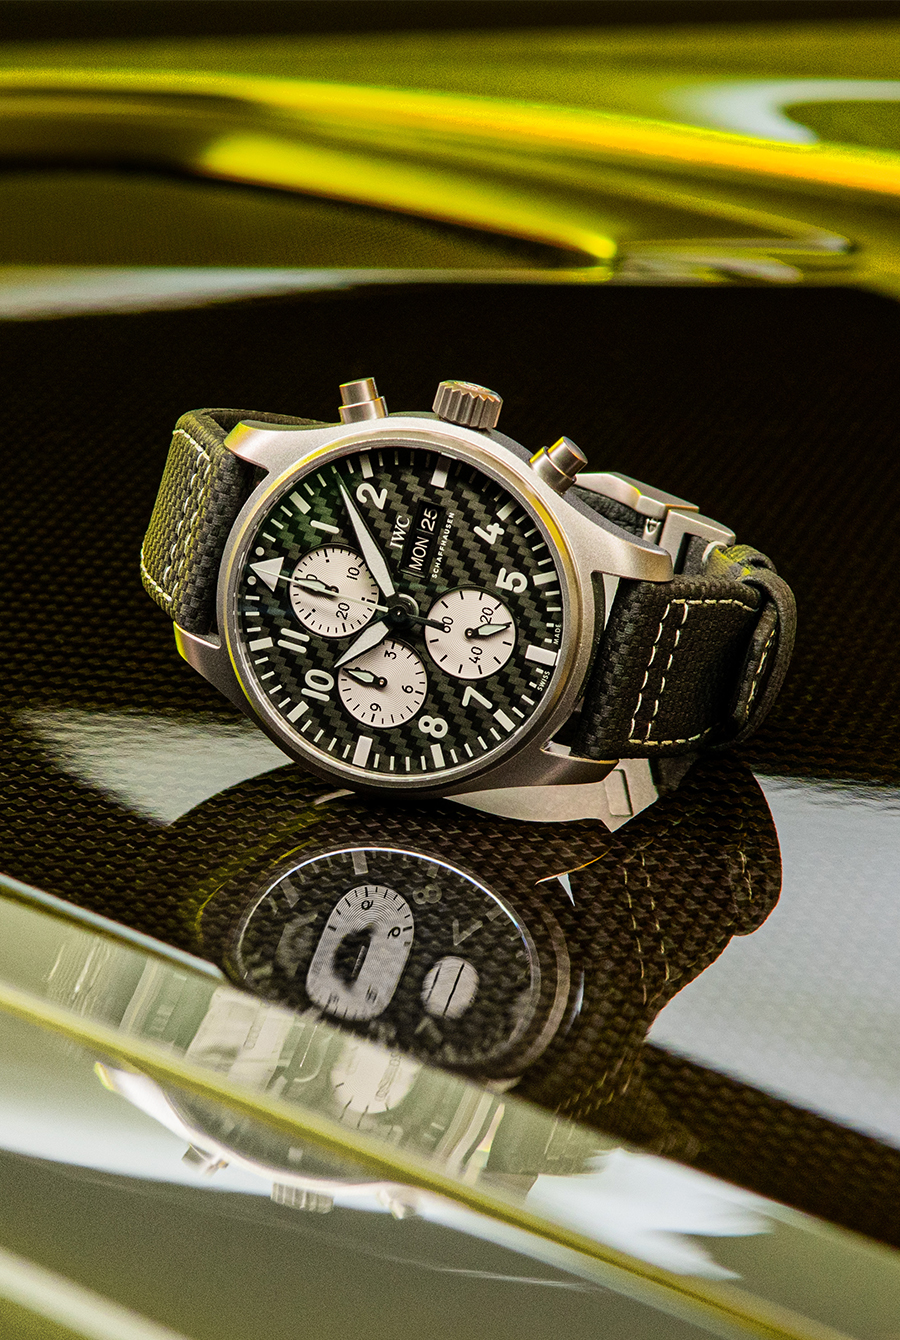 IW377903 PILOT’S WATCH CHRONOGRAPH EDITION “AMG”